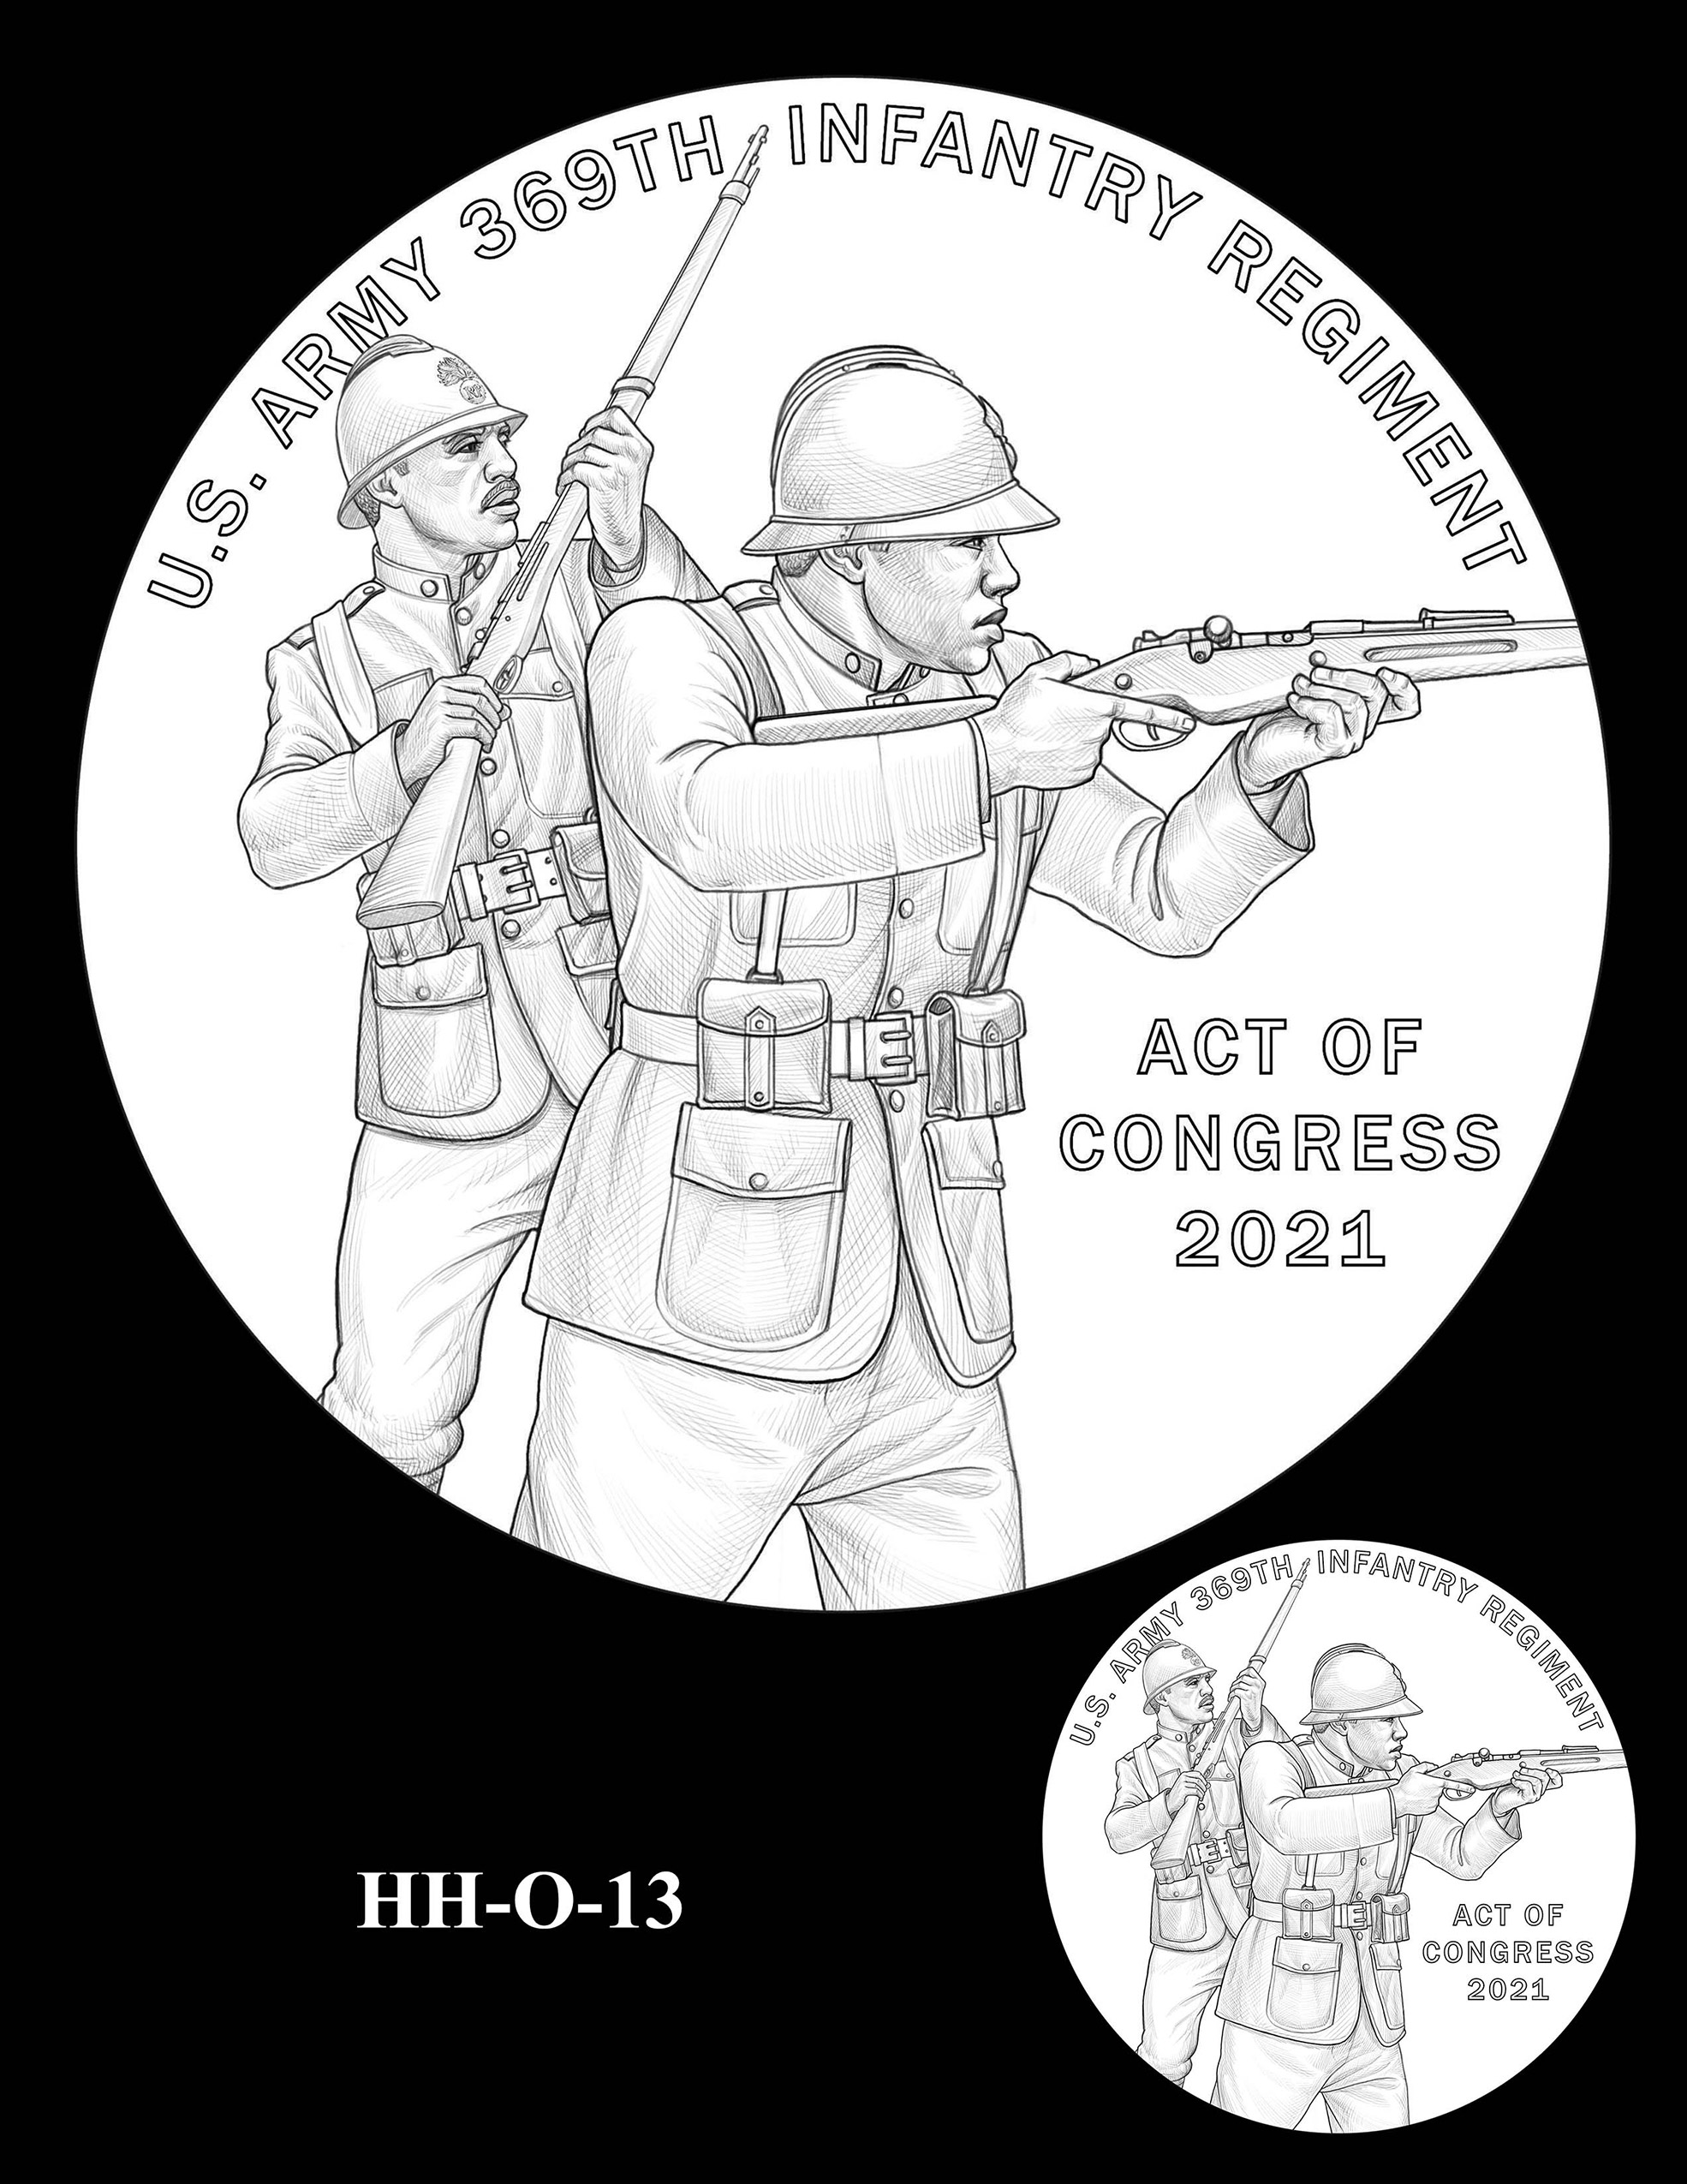 HH-O-13 -- Harlem Hellfighters Congressional Gold Medal